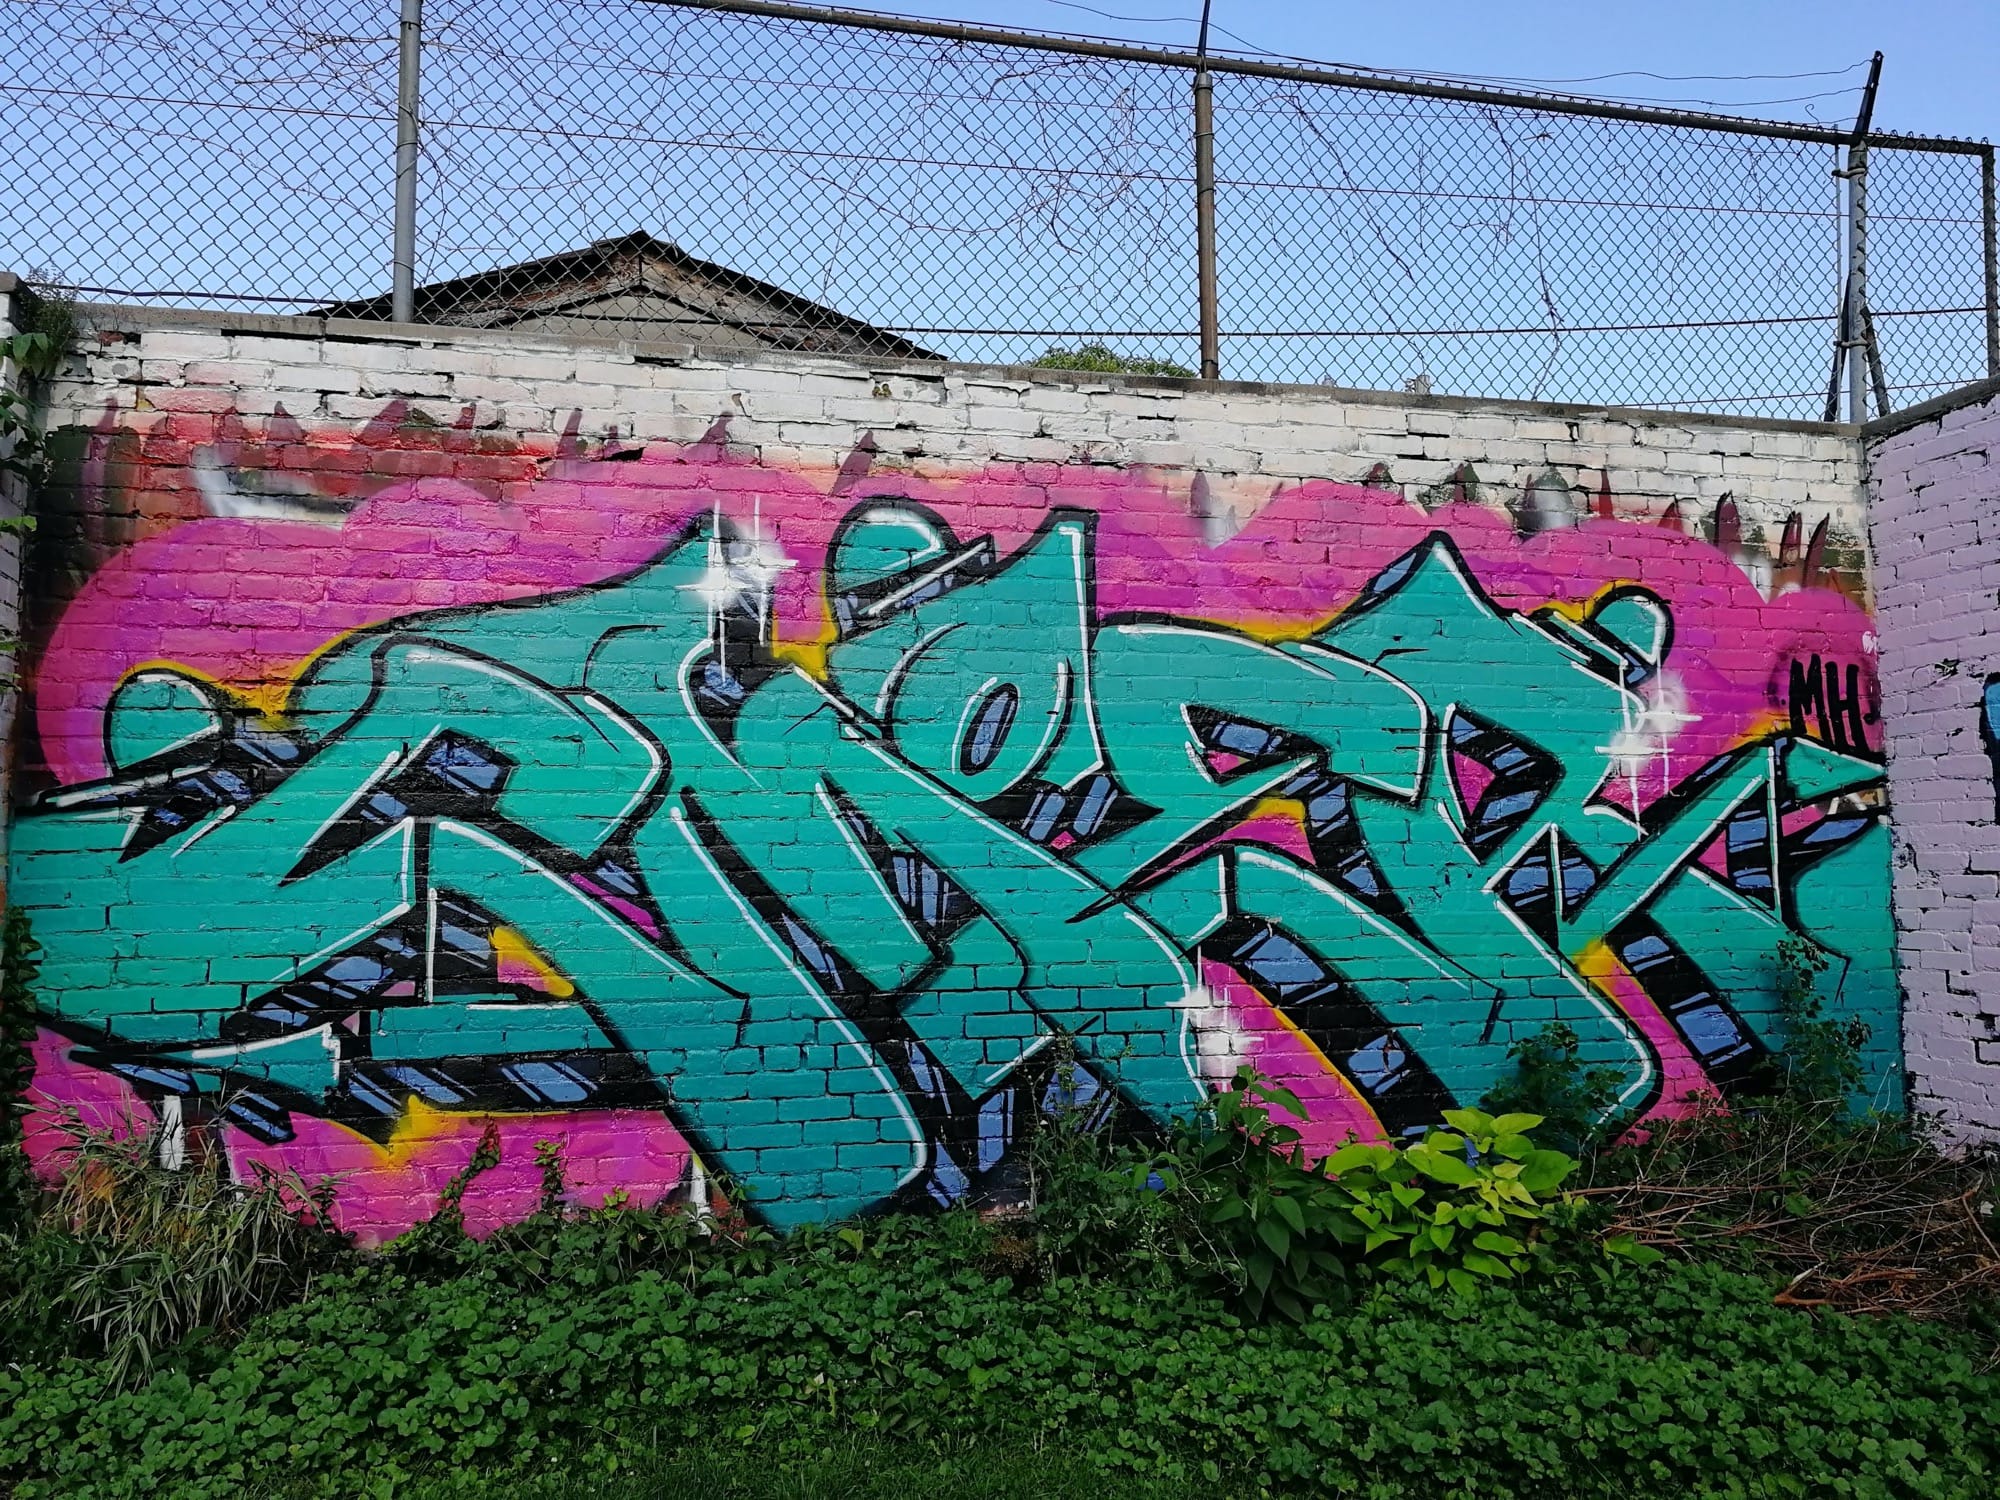 Graffiti 2458  captured by Rabot in Toronto Canada